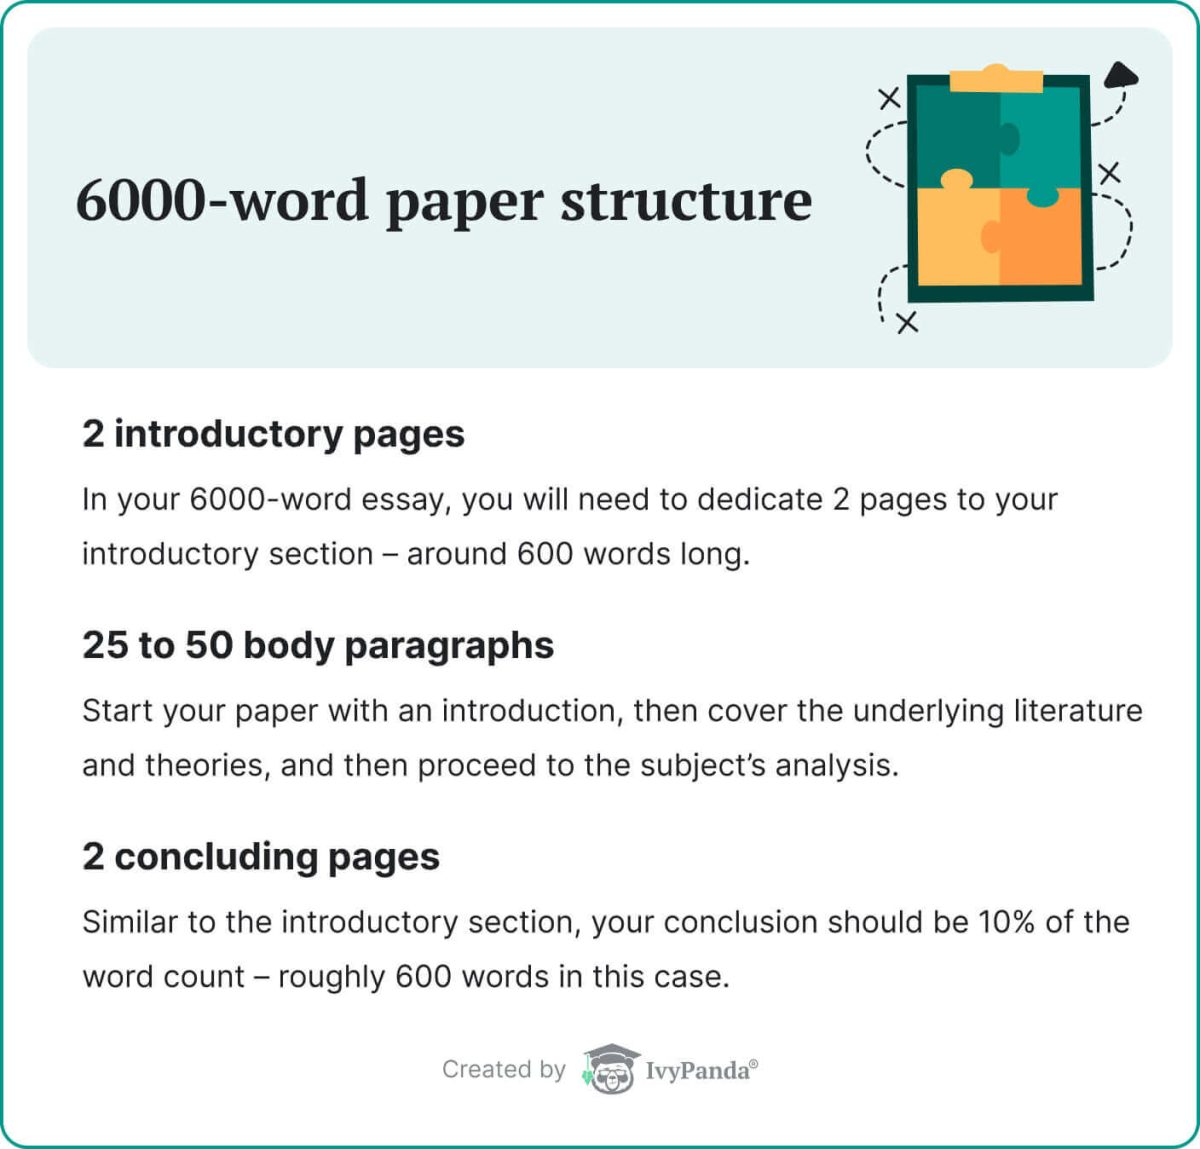 The picture describes 6000-word essay structure.